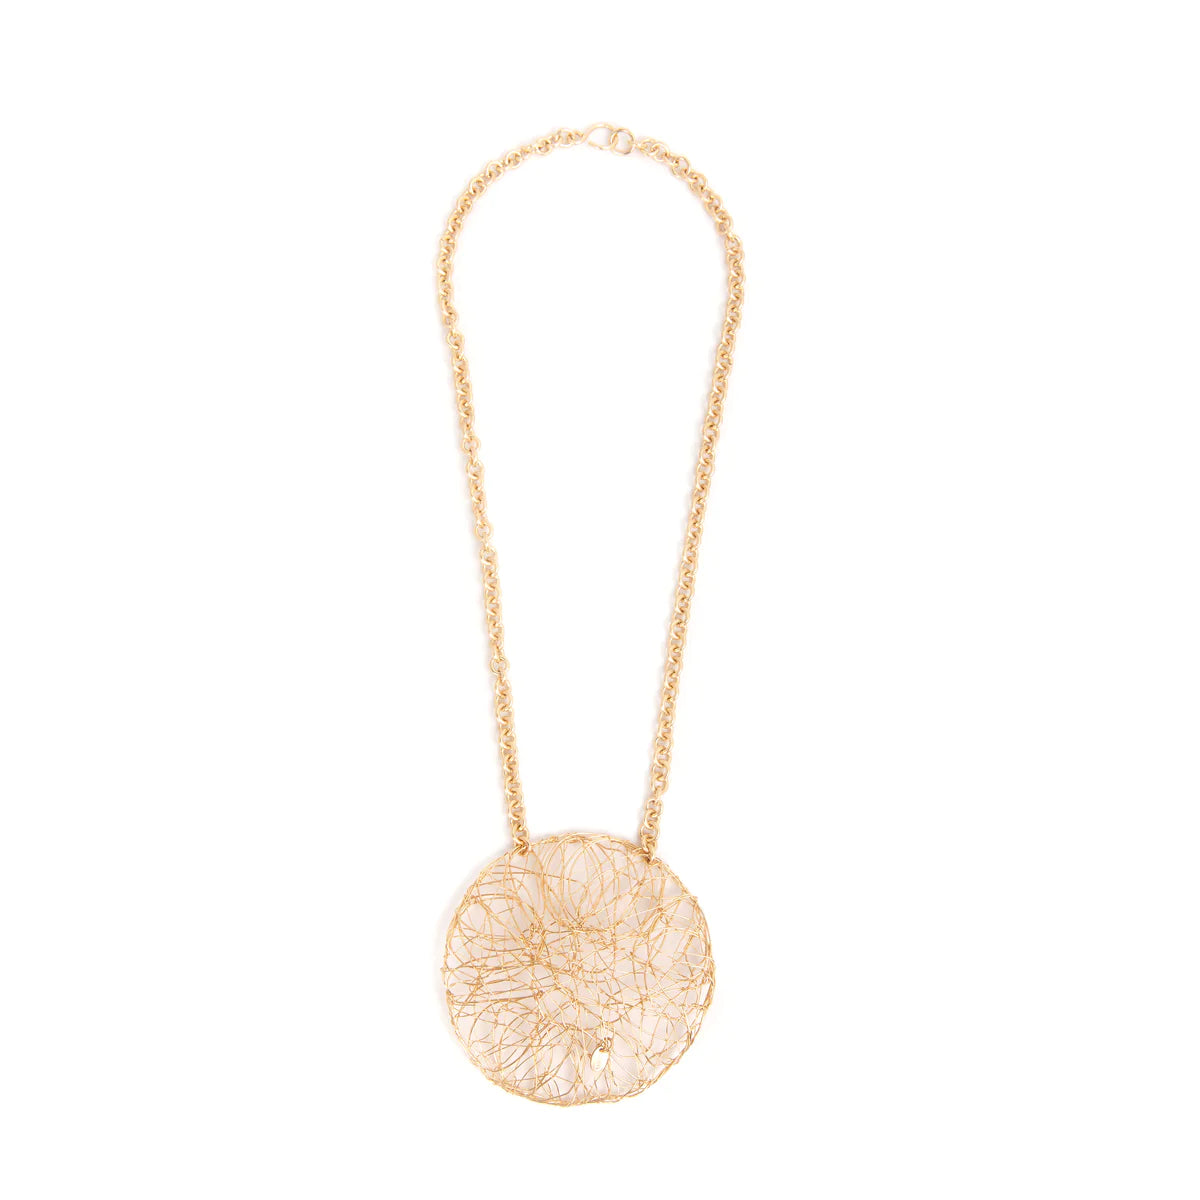 Aura Necklace #9 (70mm) - Yellow Gold